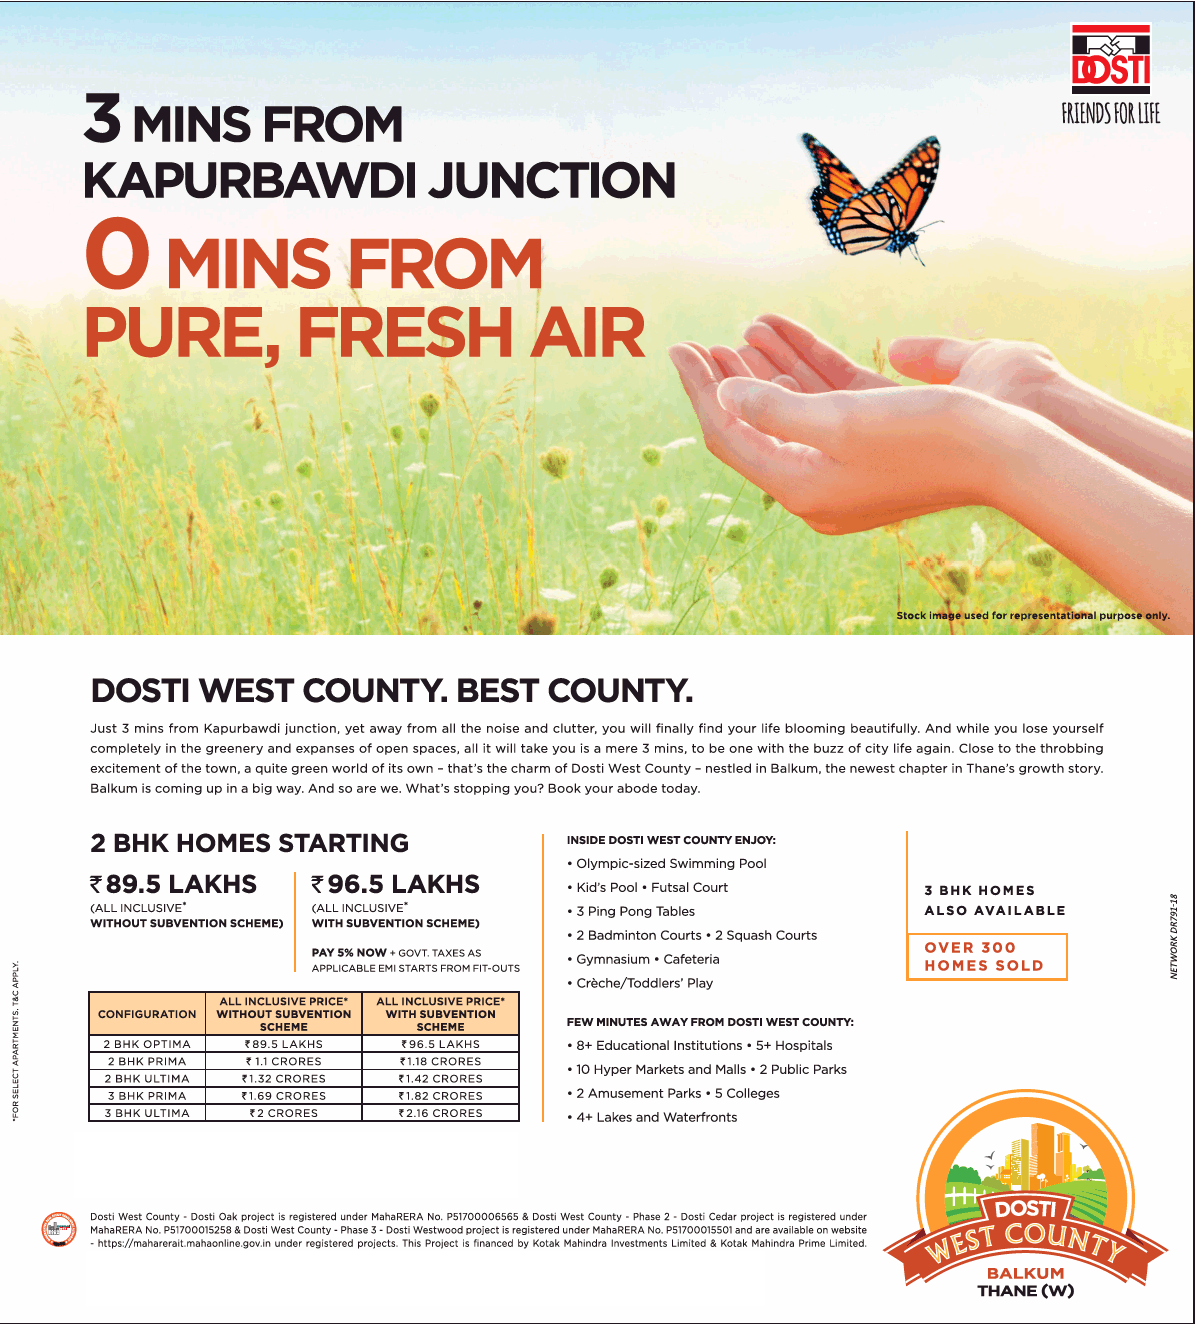 Book 2 BHK homes starting from Rs. 89.5 Lakhs at Dosti West County in Mumbai